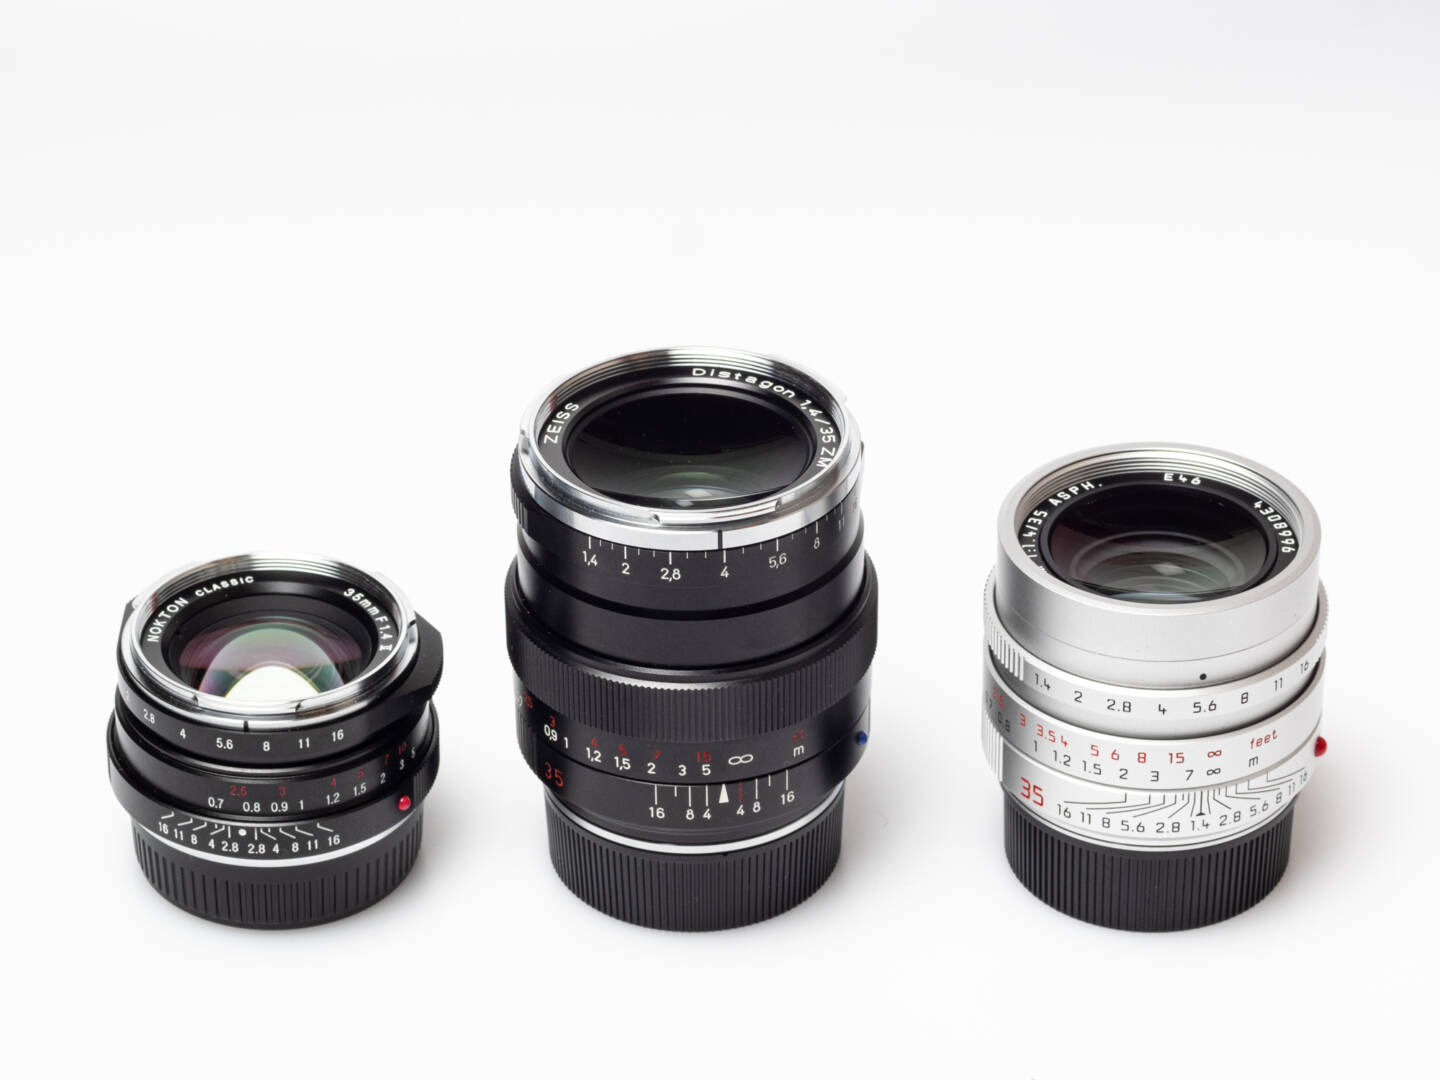 A fast 35 is excellent as an all-round lens. If Voigtländer’s Nokton Classic II 35/1.4 (left) is not your cup of tea, think about the Zeiss Distagon ZM 35/1.4 or Leica’s current 35 Summilux (from left).#1 Carl Zeiss Planar T* 2/50 ZM